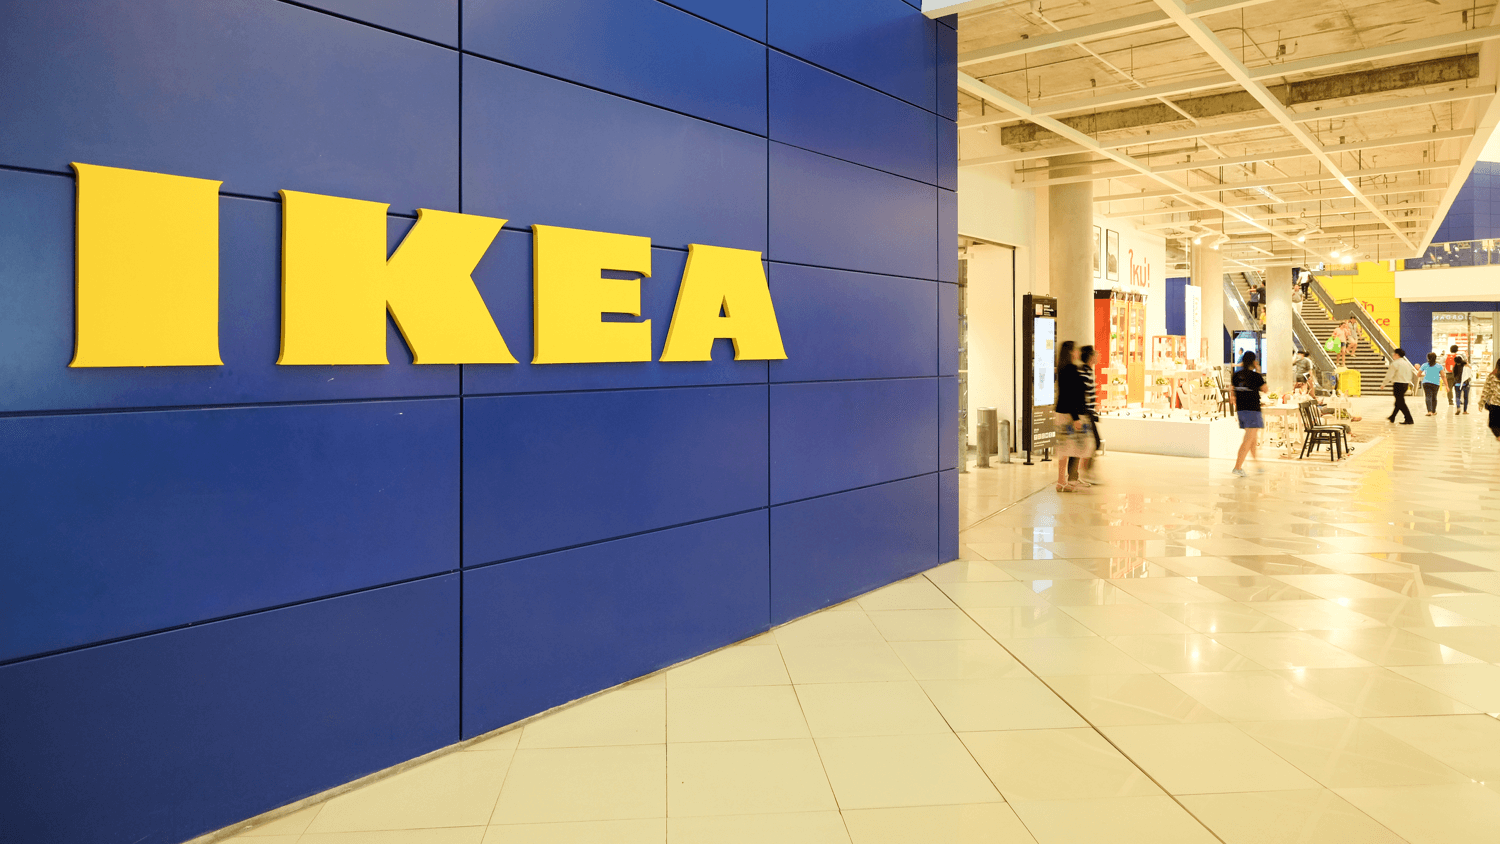 IKEA stopped the sale on the Russian website